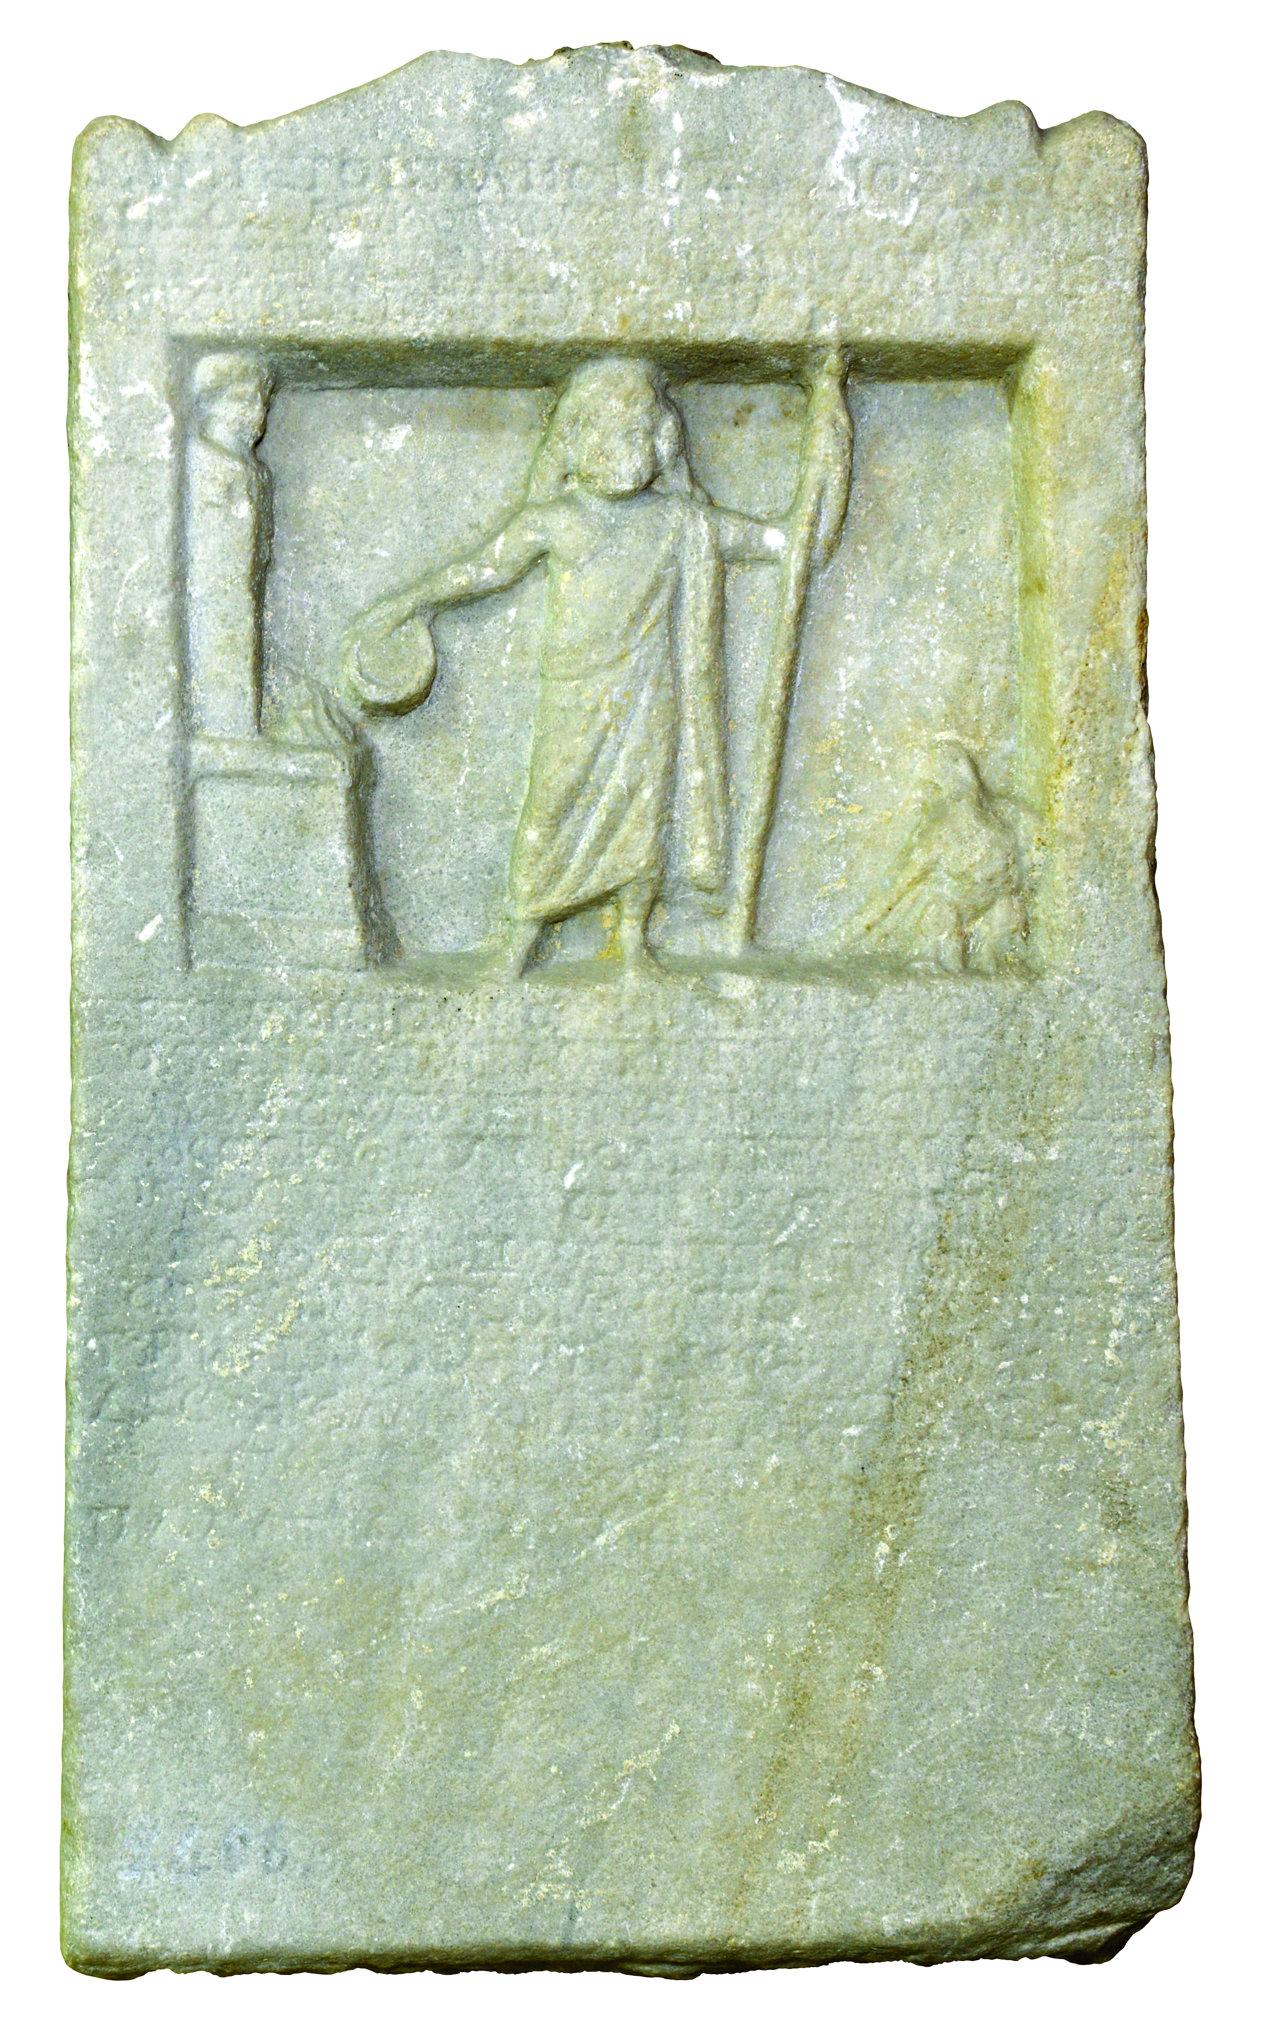 2- The stela which was offered to Zeus Dorios. It states “As Hieronymus of Zeus Serapis, Lukios Molios Tertios offered this stela to Zeus Dorios for the peasants by paying it out of their pocket” (Marble, Edirnekapı, Late Hellenistic period, 2<sup>nd</sup> – 1<sup>st</sup> centuries BCE) Istanbul Archeology Museum)